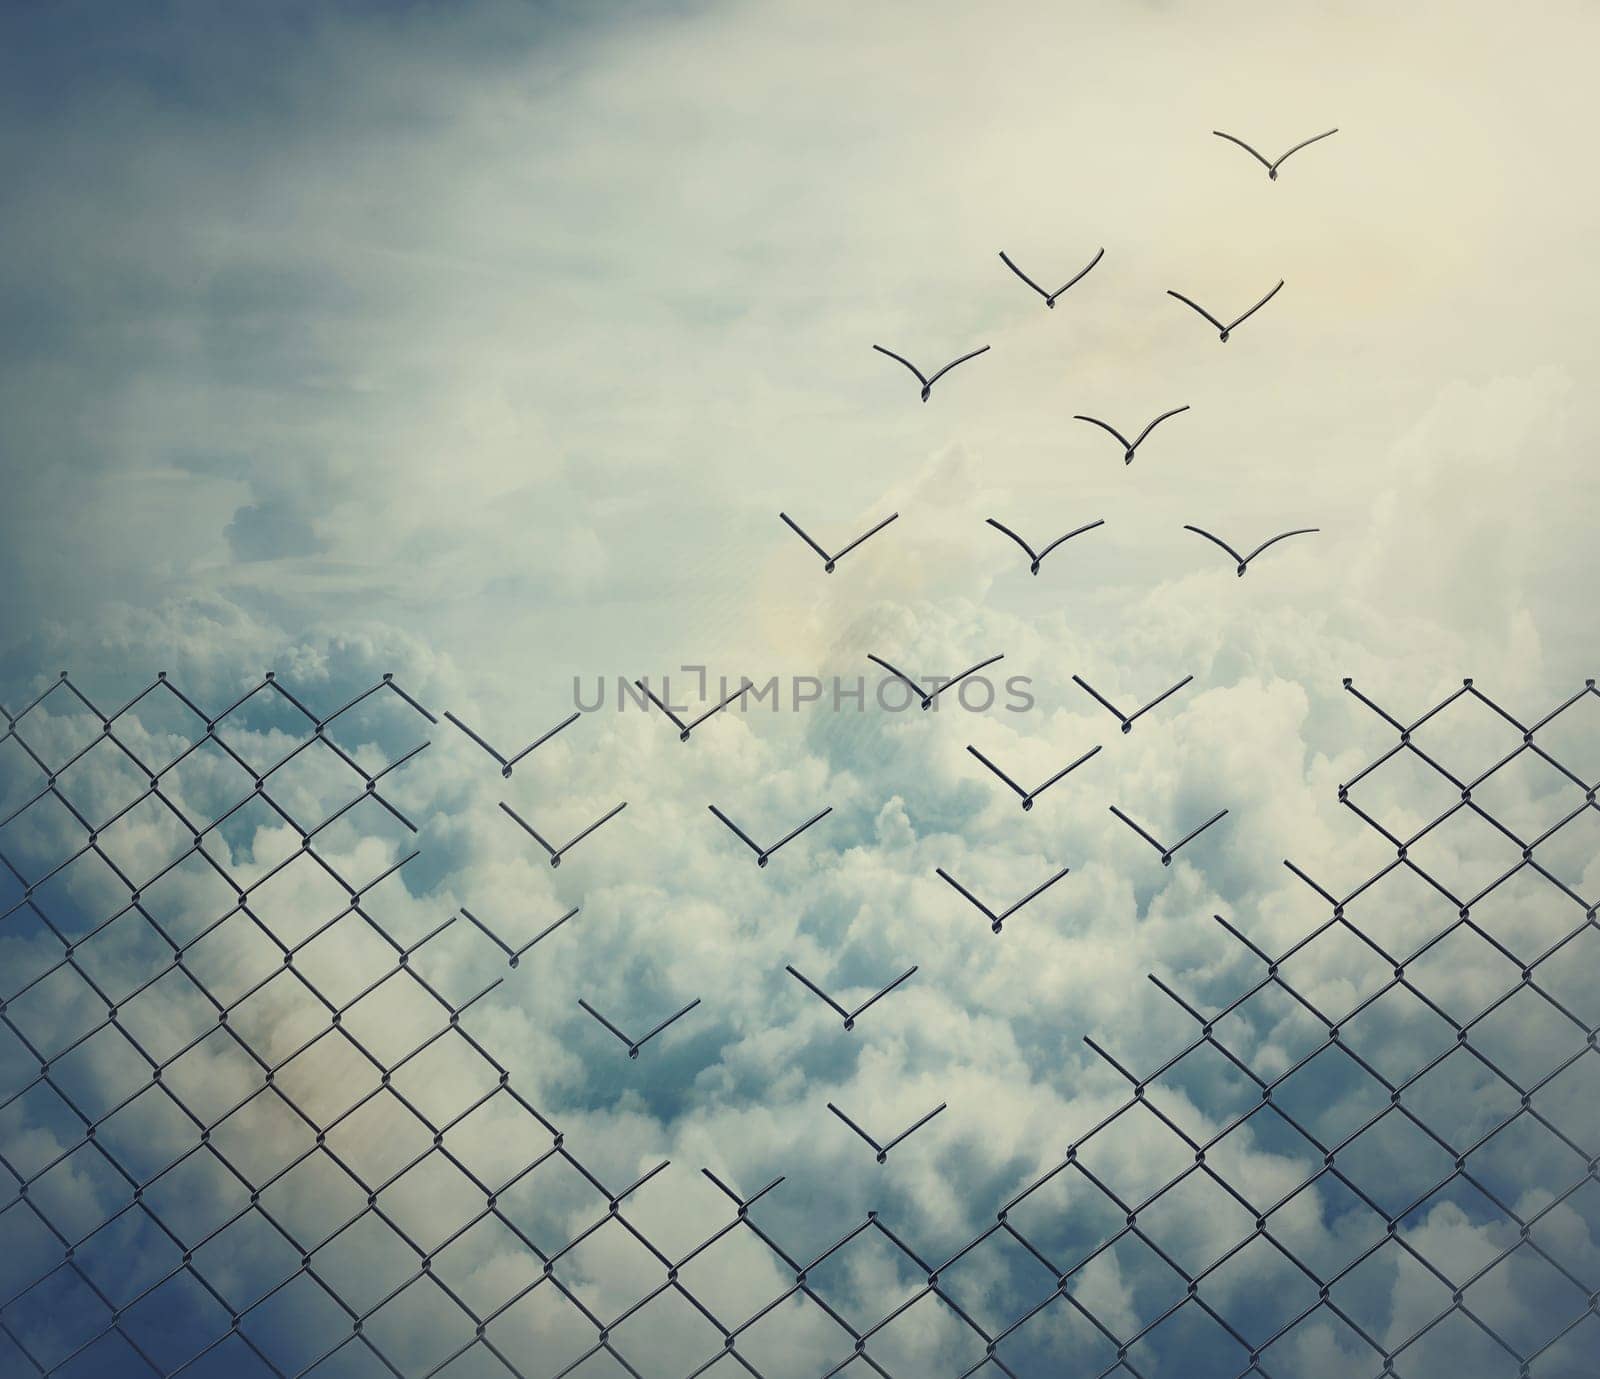 Surreal and magical escape as metallic wire mesh transforming into flying birds above the clouds. Overcoming obstacles together, teamwork concept. Freedom and success minimalist inspirational art. by psychoshadow